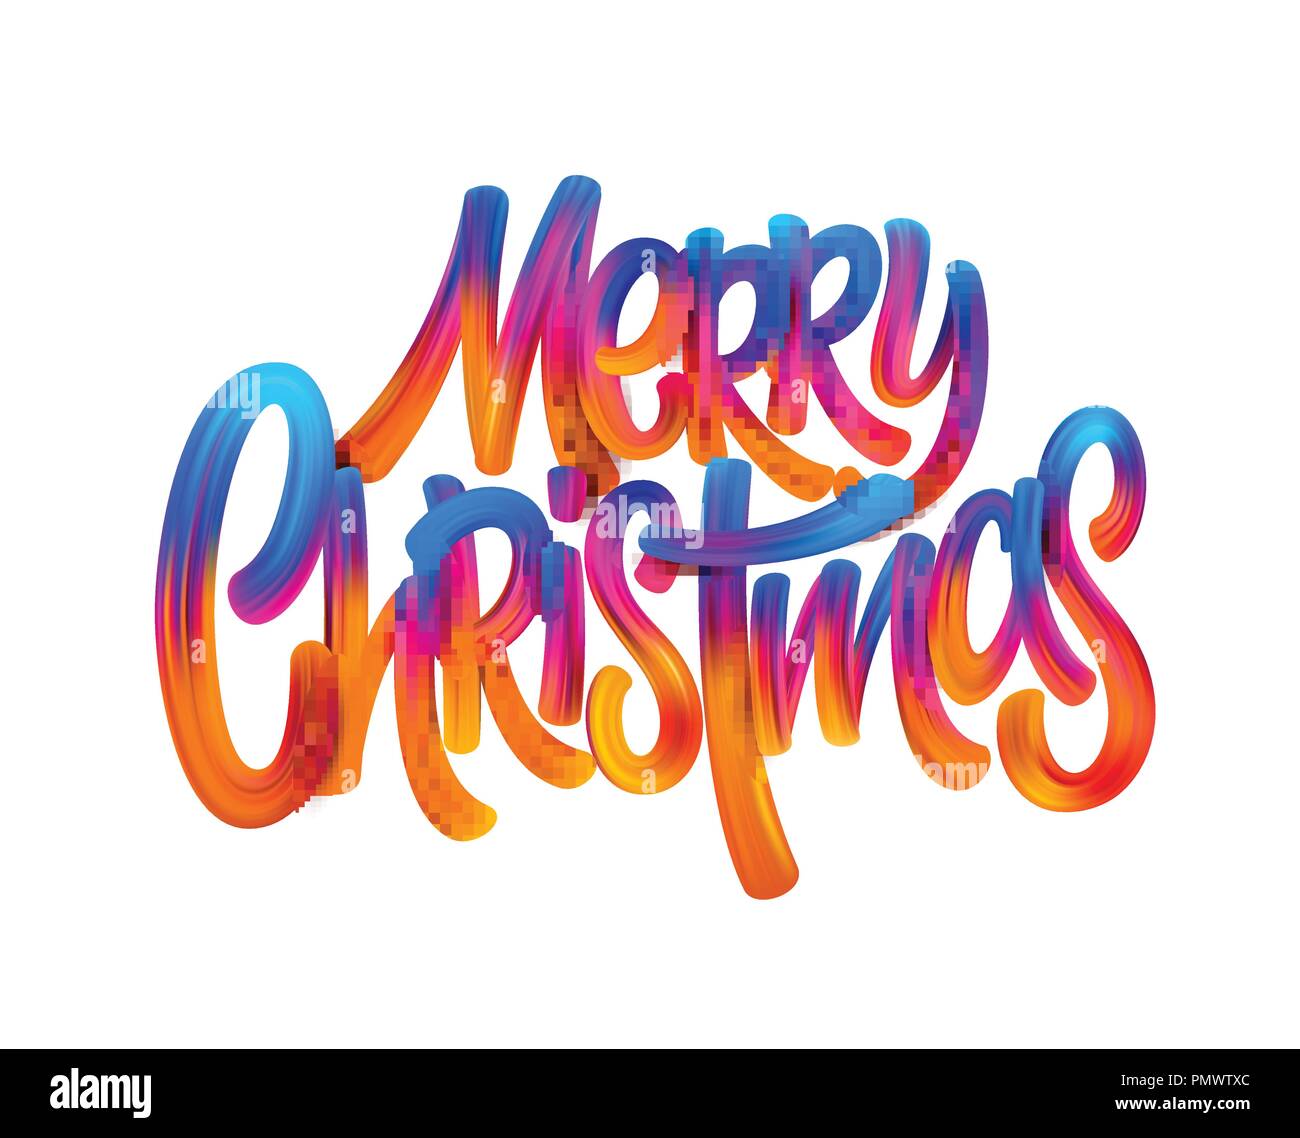 Merry christmas hand drawn oil paint lettering Stock Vector